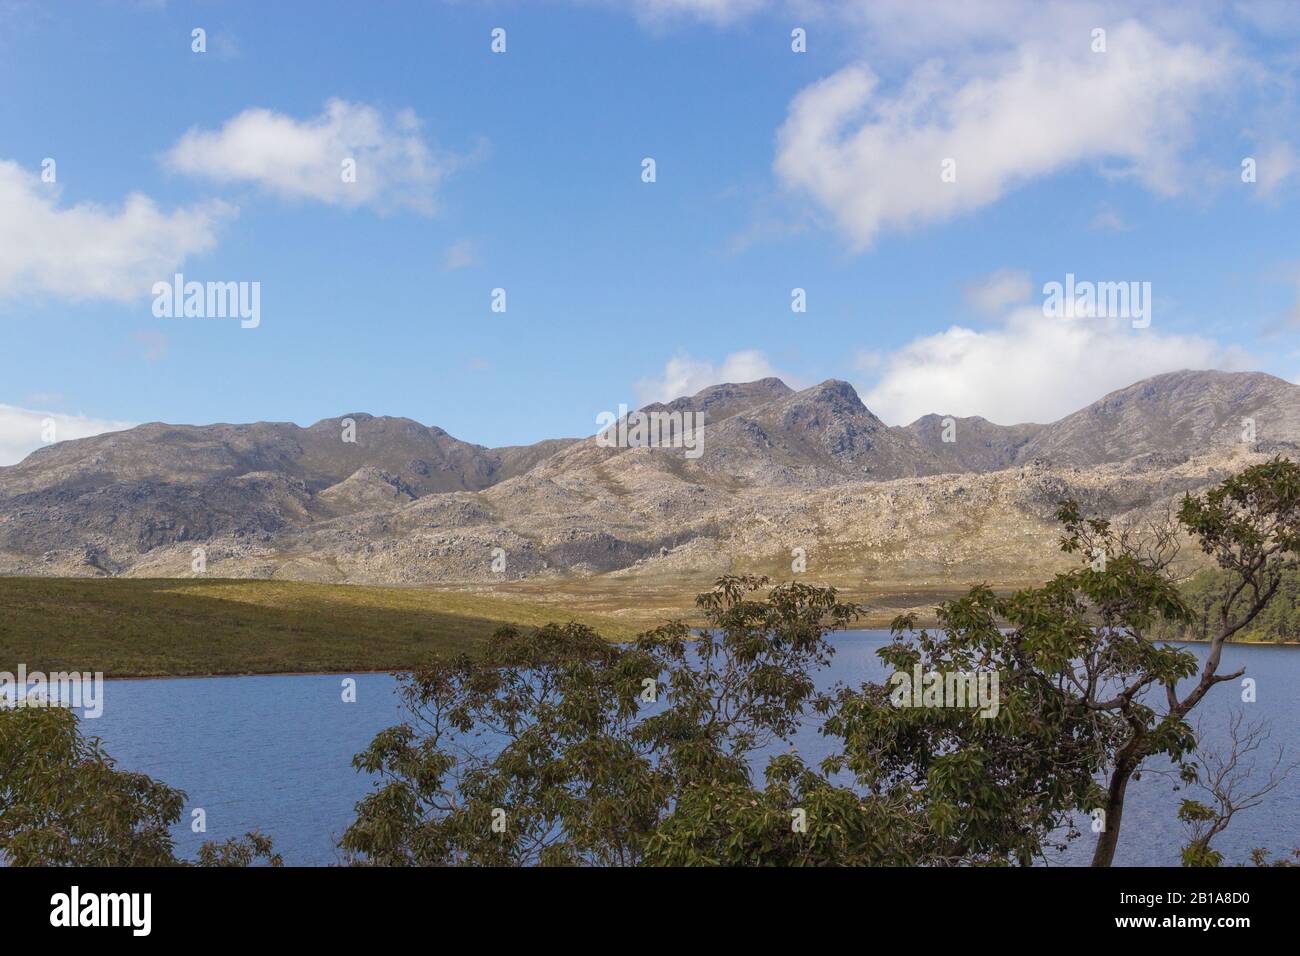 View in the Mountains from Steenbras River Dam, Gordon's Bay, Western Cape, South Africa Stock Photo